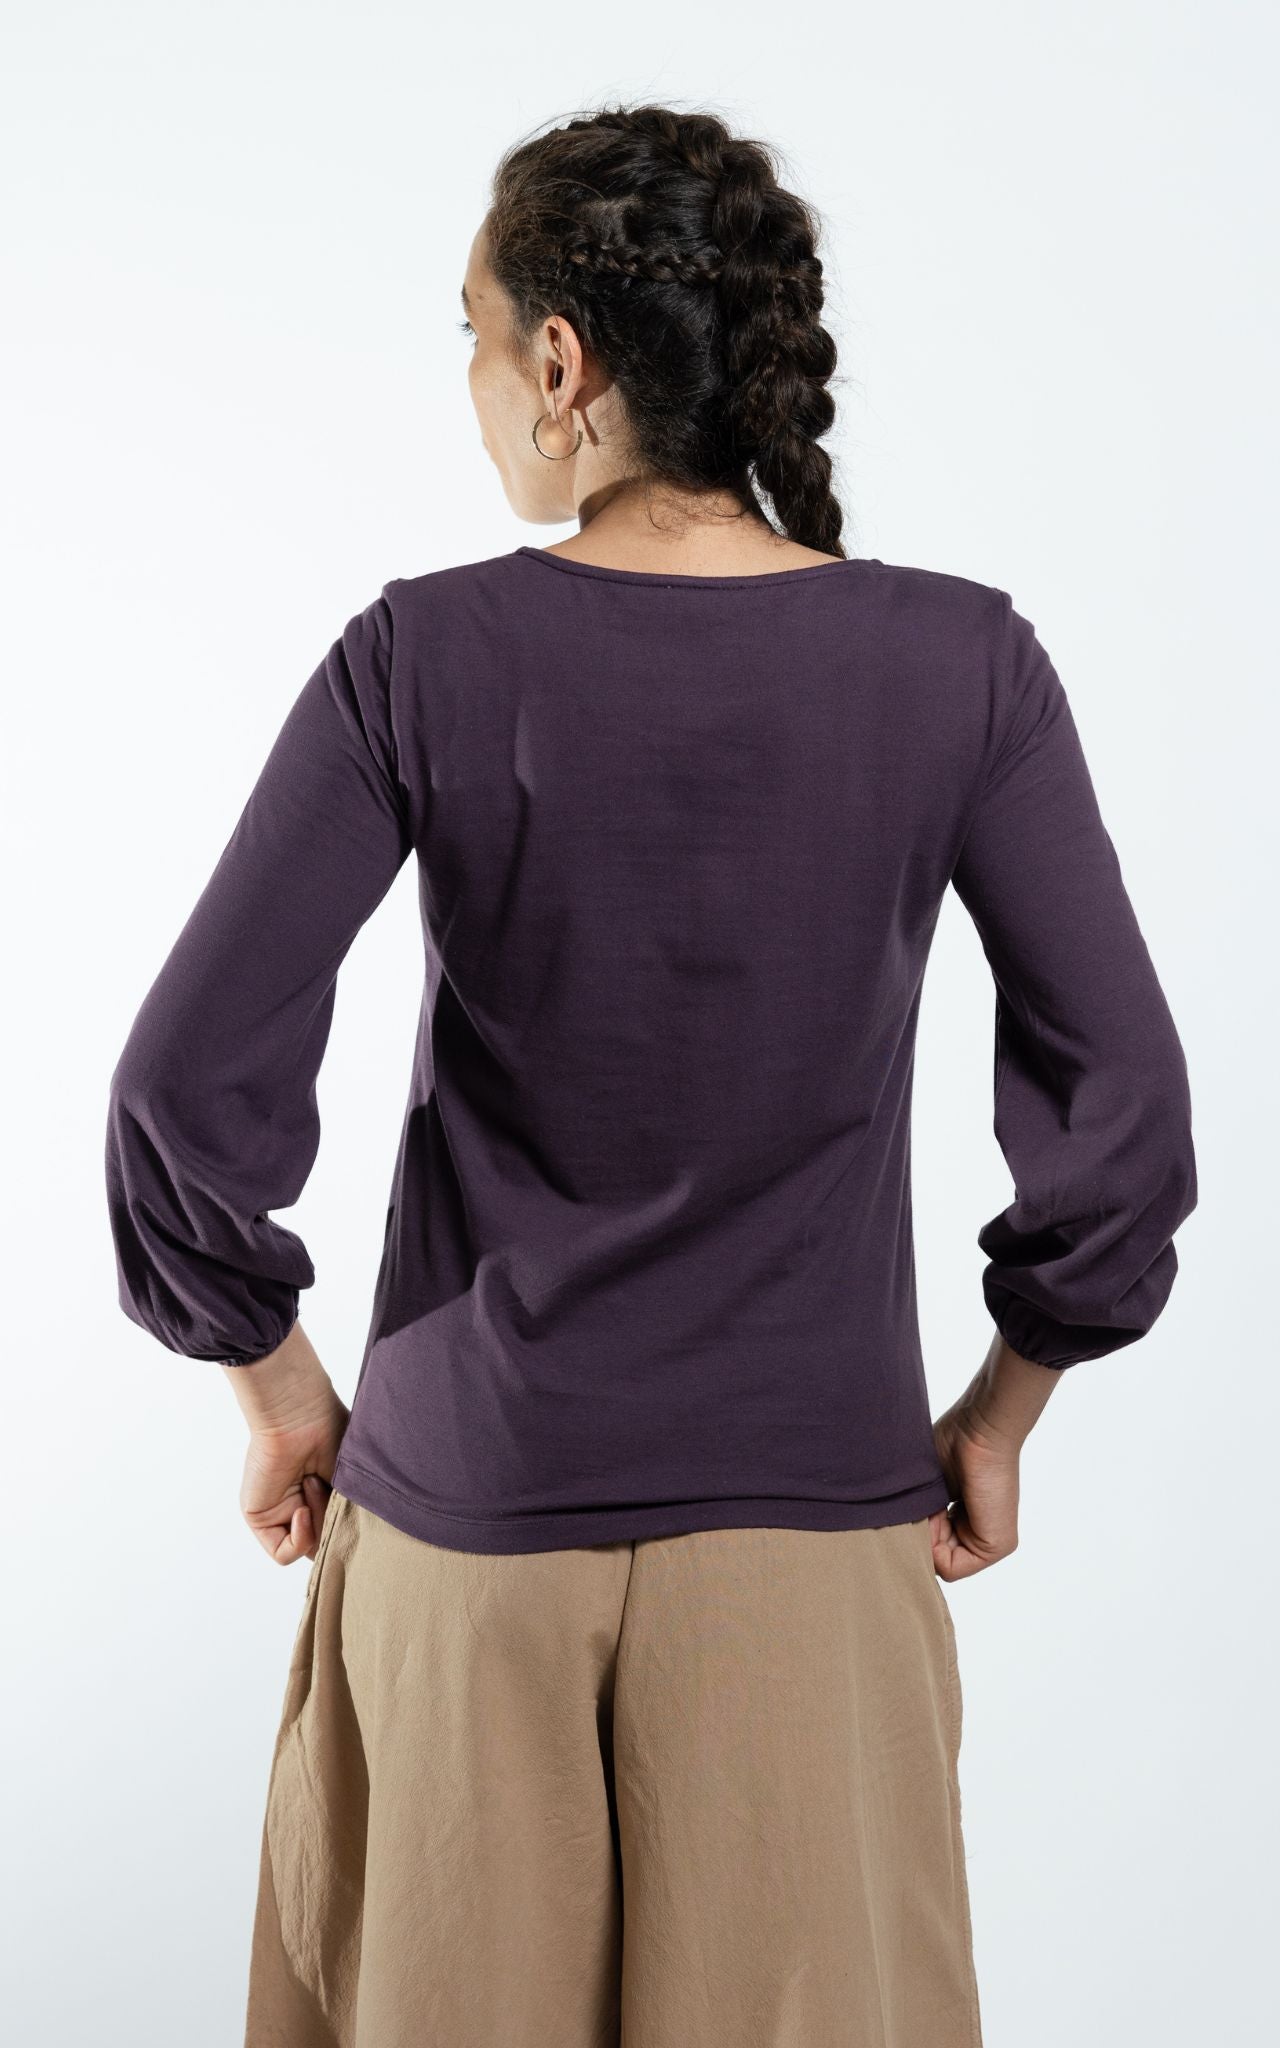 Surya The Label Ethical Organic Cotton 'Zoé' Top made in Nepal - Eggplant